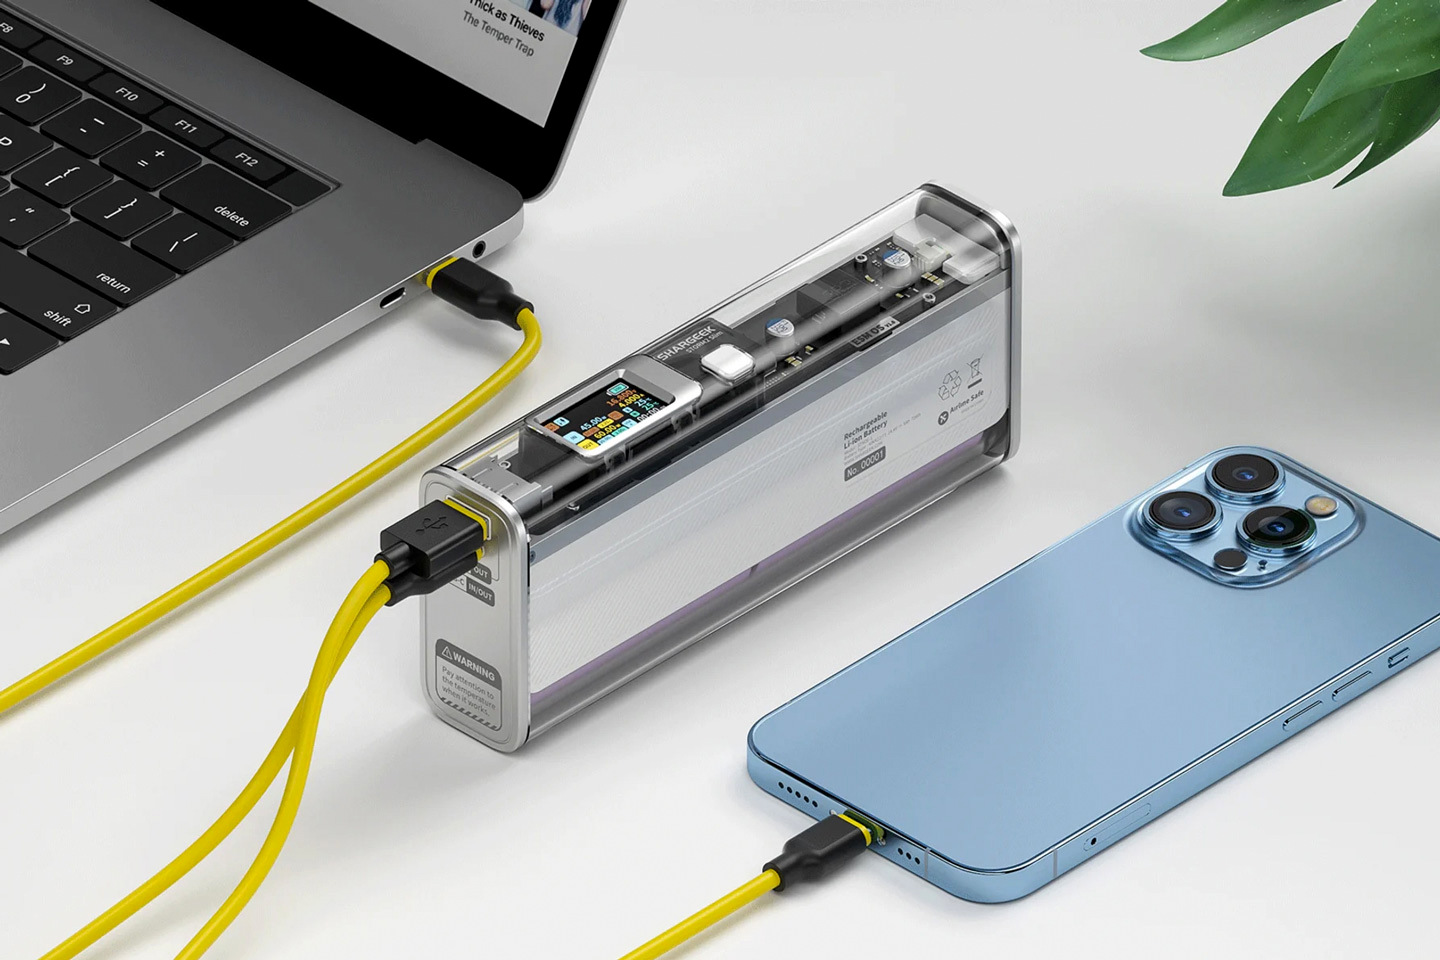 #This cyberpunk transparent power bank should pair rather wonderfully with the Nothing phone (1)